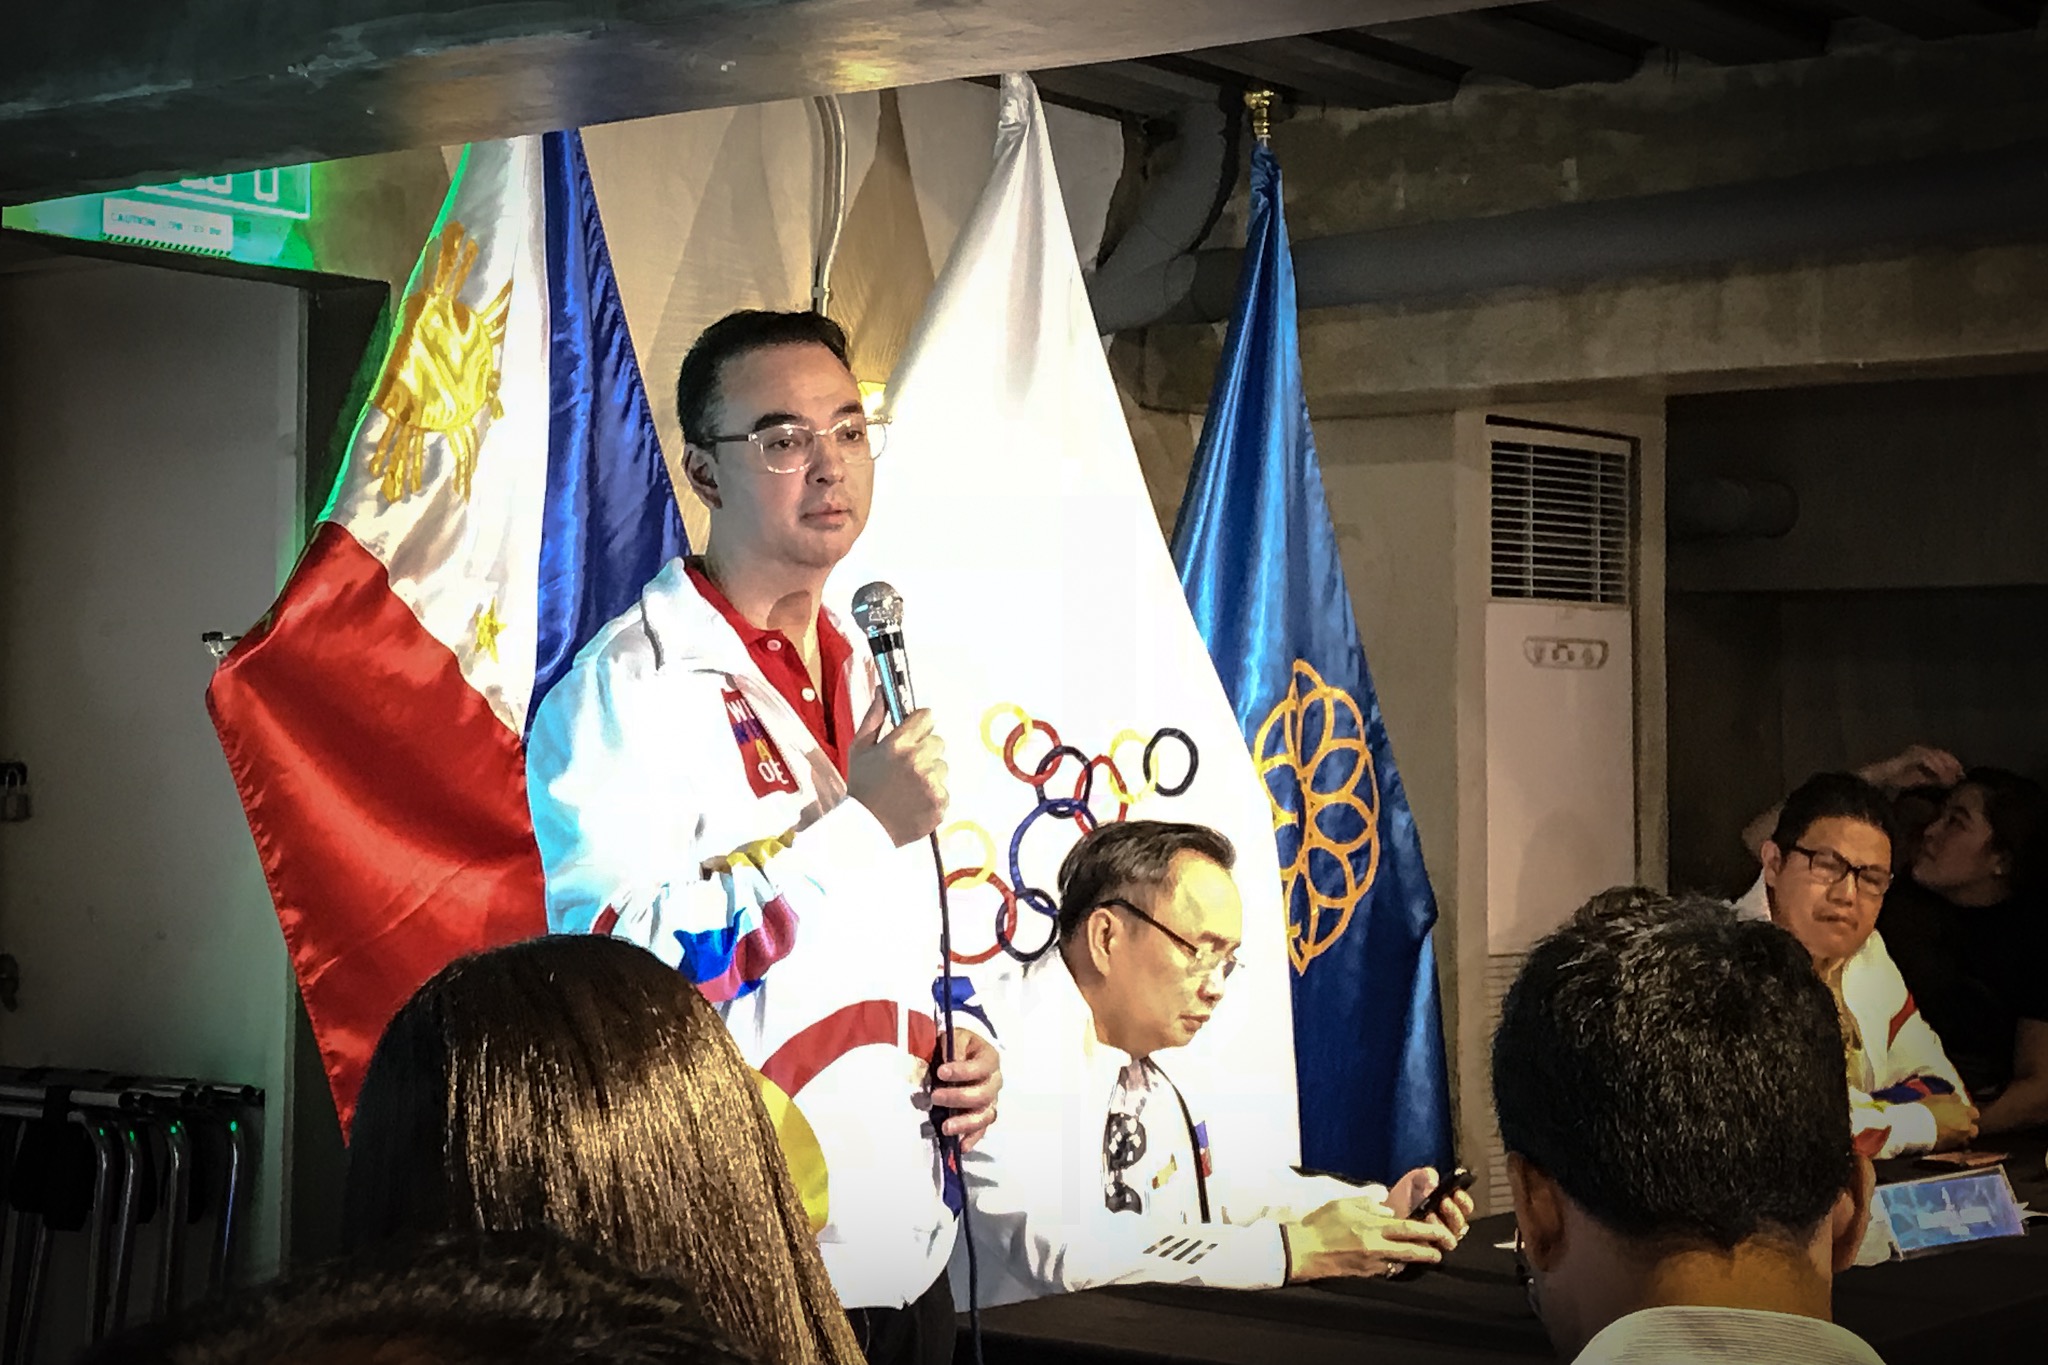 IN LIMBO. The Philippine SEA Games Organizing Committee (PHISGOC) led by Cayetano is questioned for alleged corruption. File photo by Beatrice Go/Rappler   